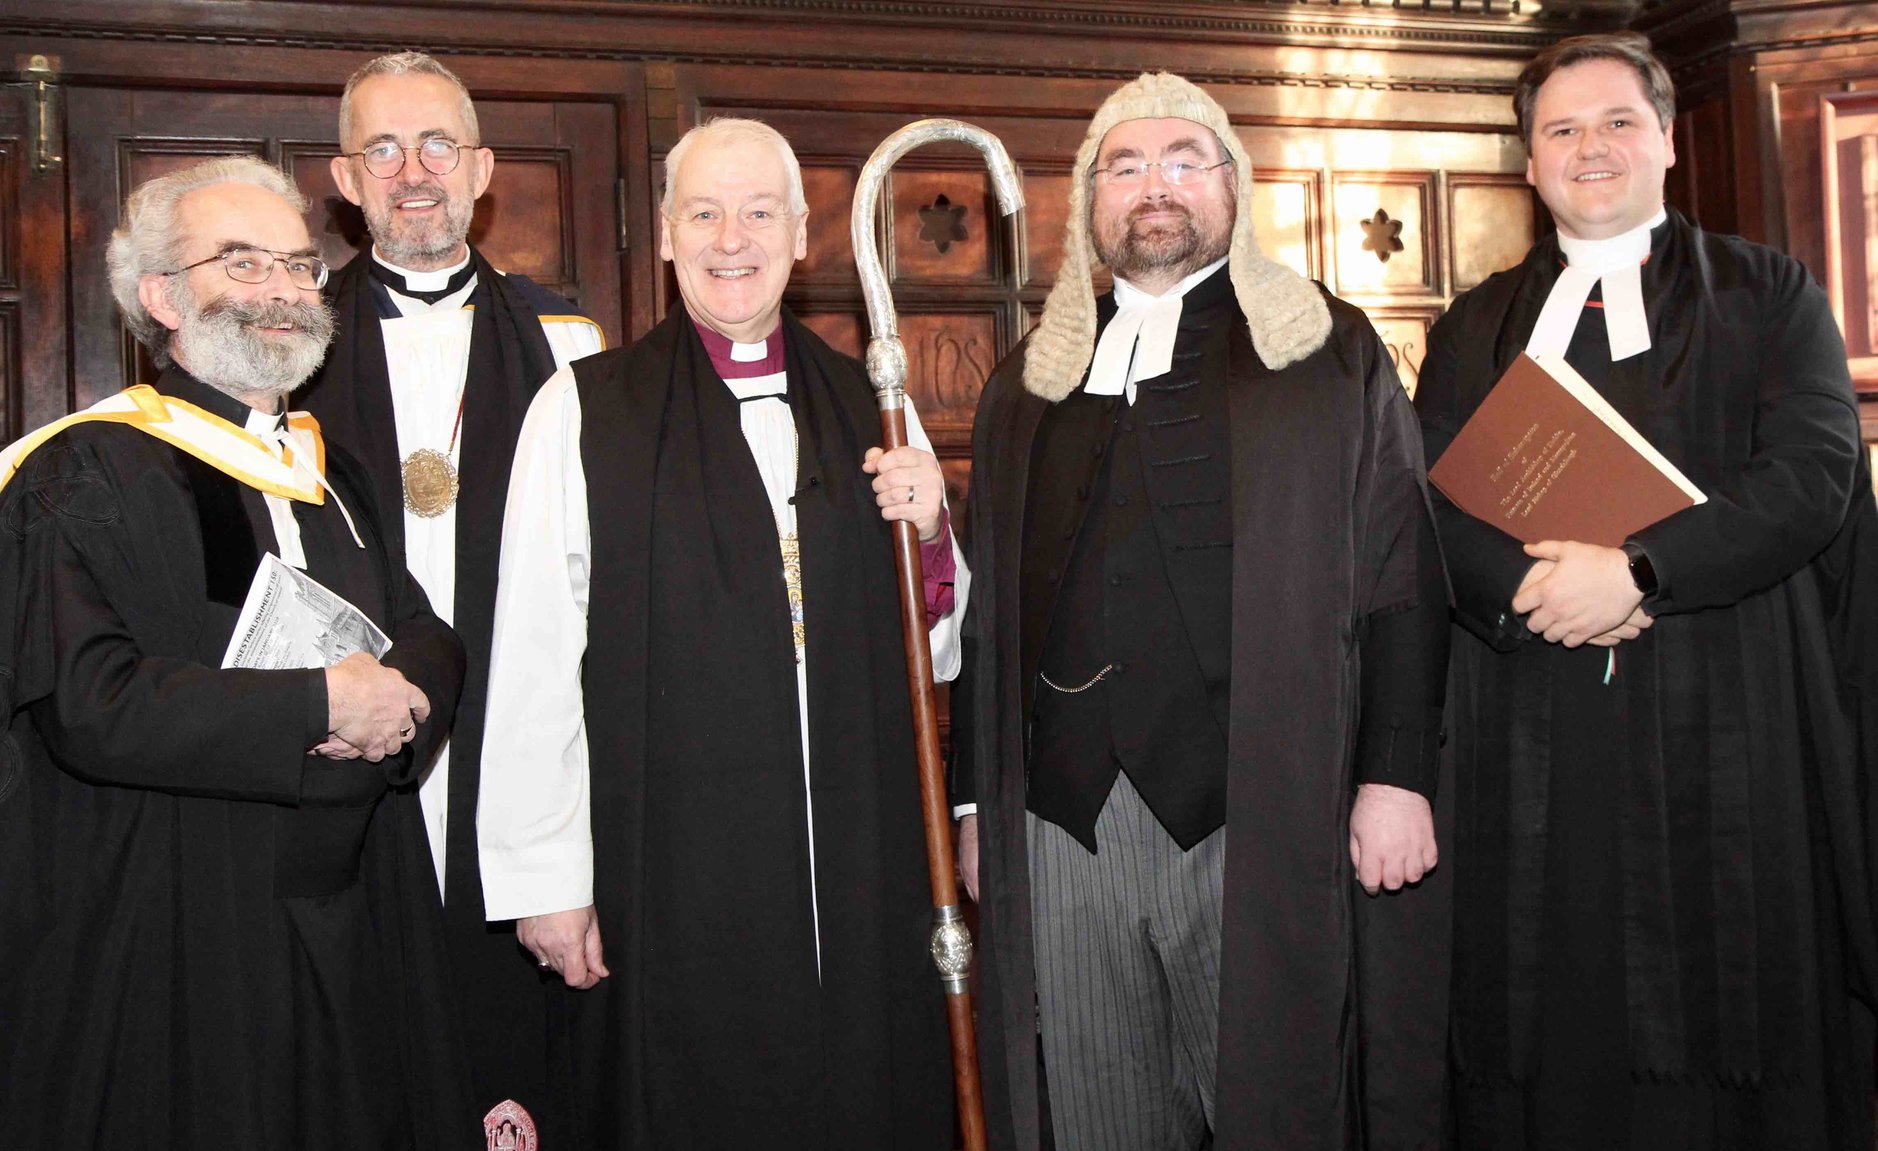 The Revd Robert Marshall appointed Diocesan and Provincial Registrar